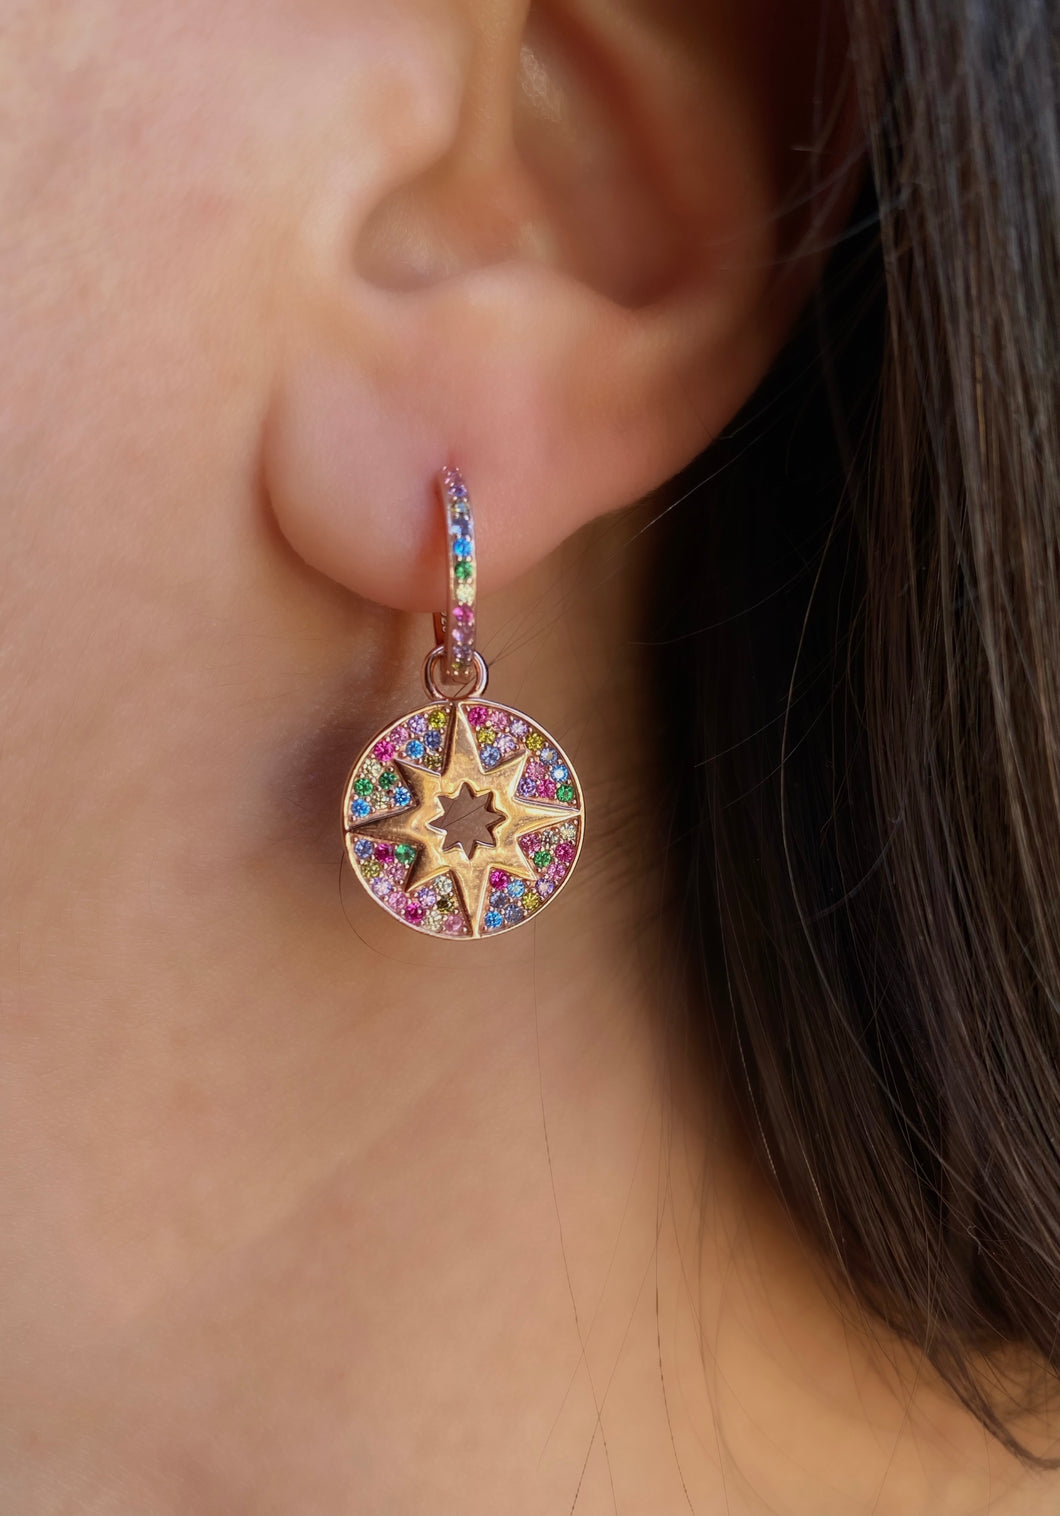 Morning star earring with rainbow stones